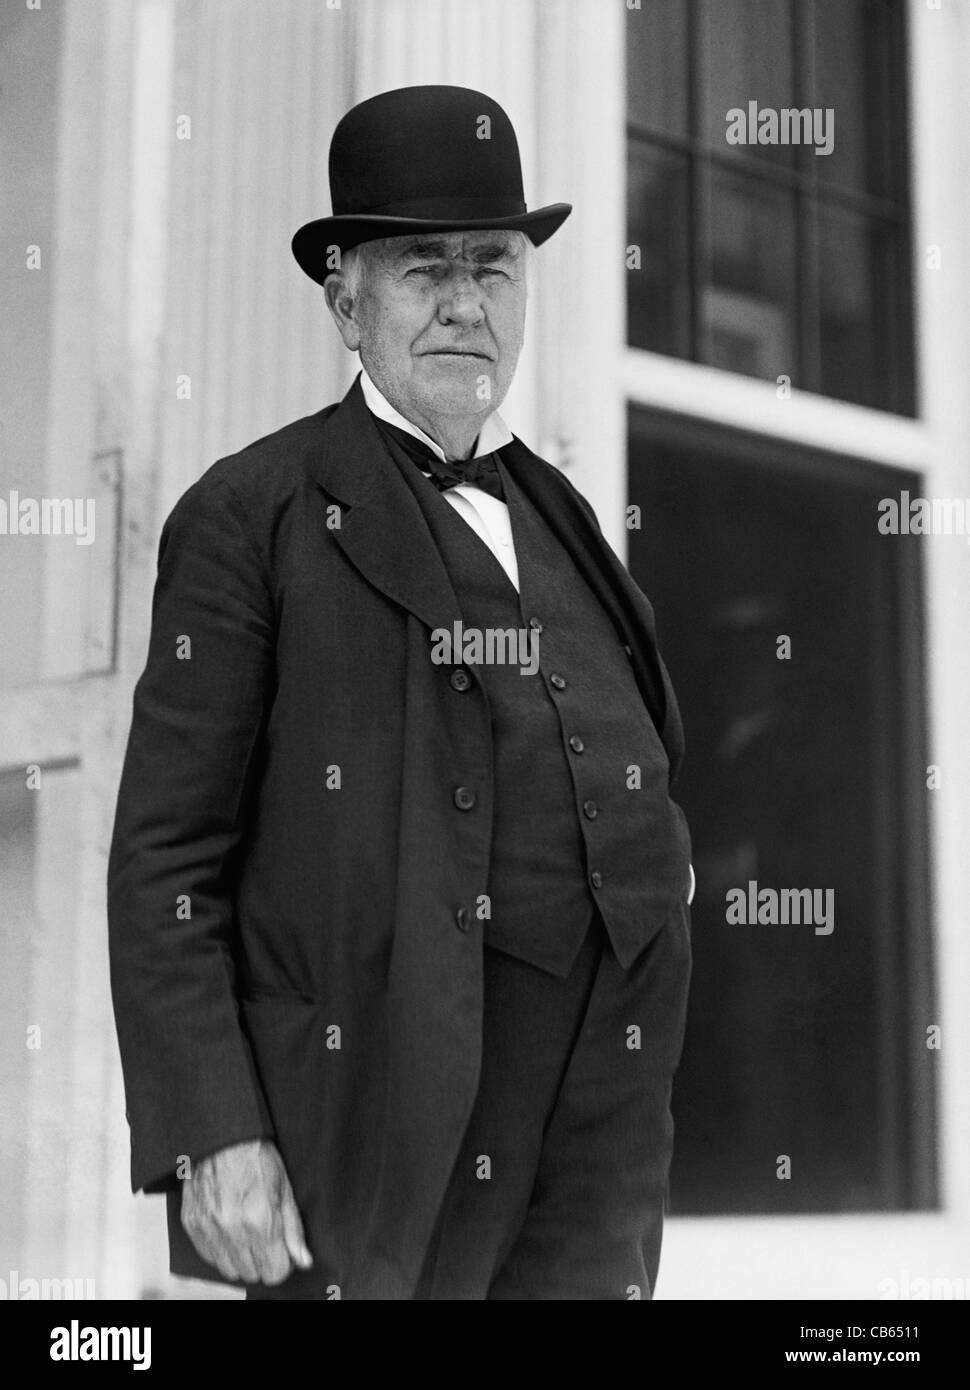 Vintage photo of American inventor and businessman Thomas Alva Edison (1847 – 1931). Photo taken in 1922 by the National Photo Company. Stock Photo